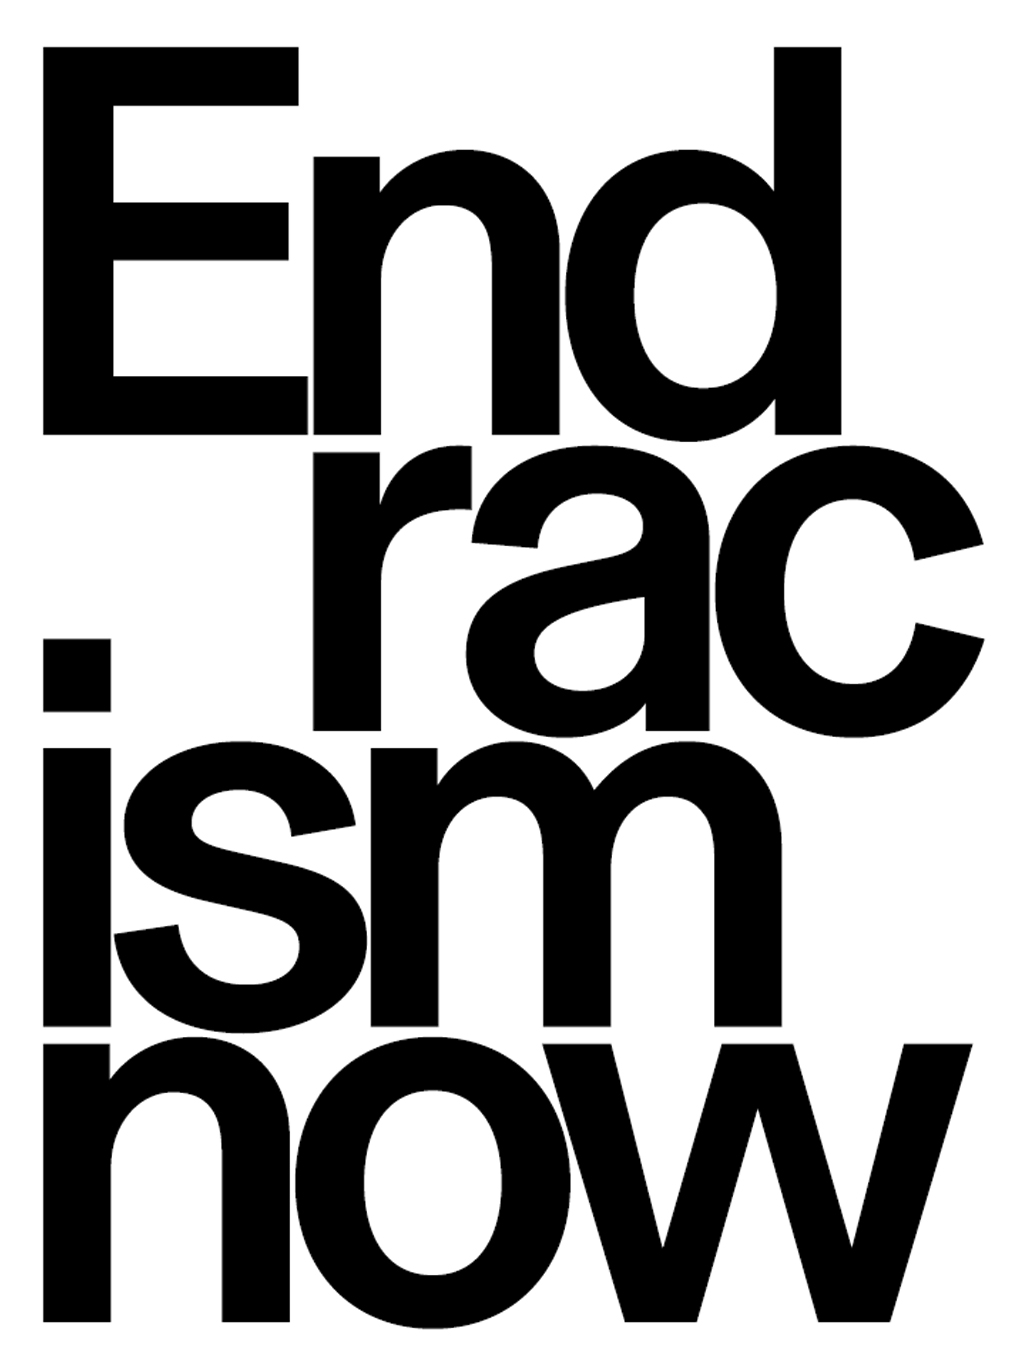 End racism now